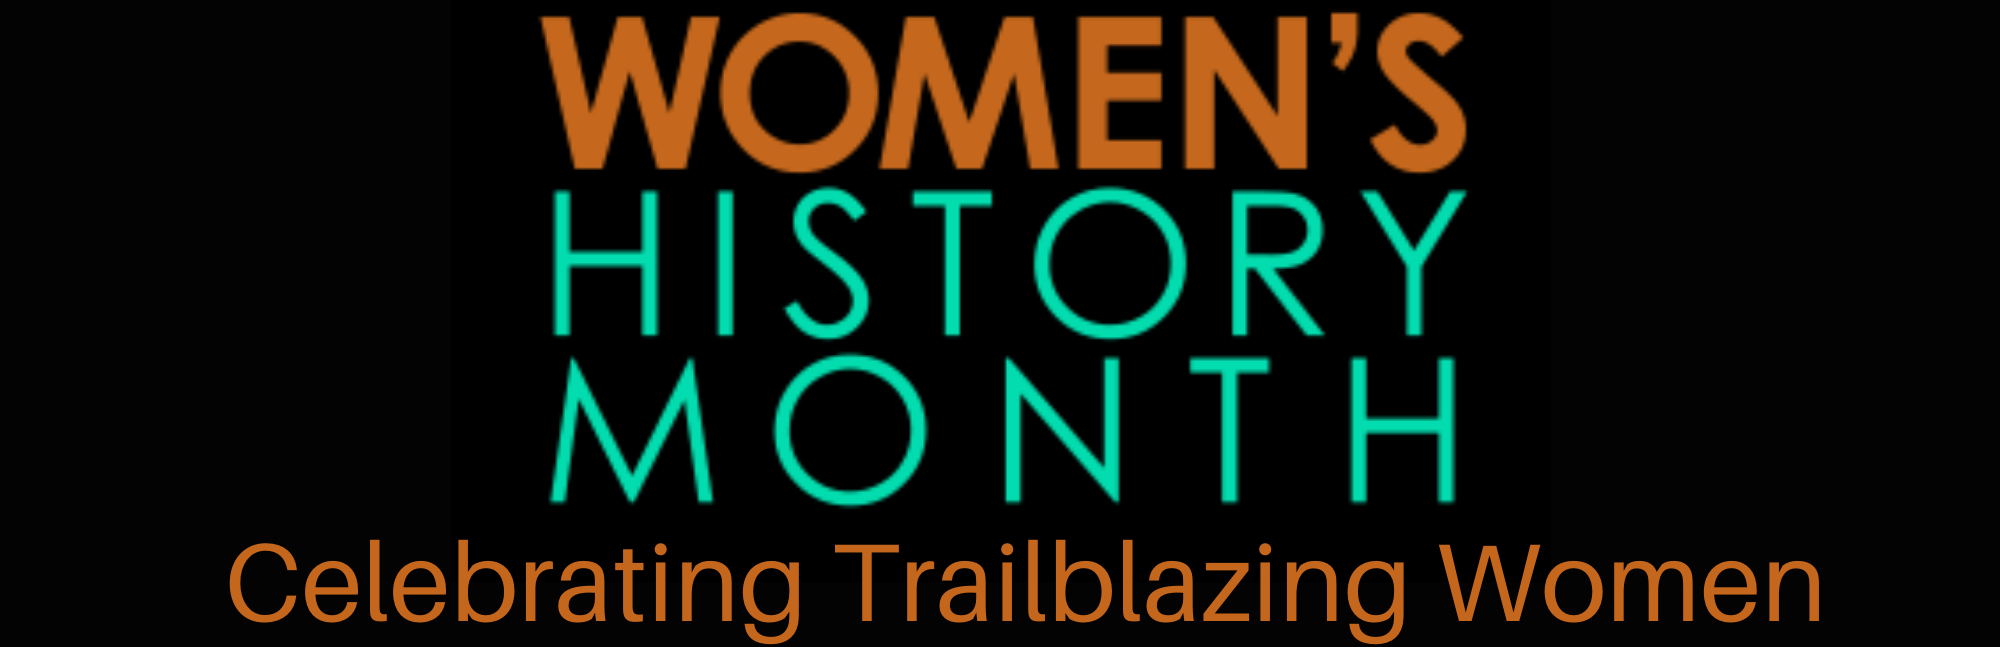 Women's History Month 2021 banner